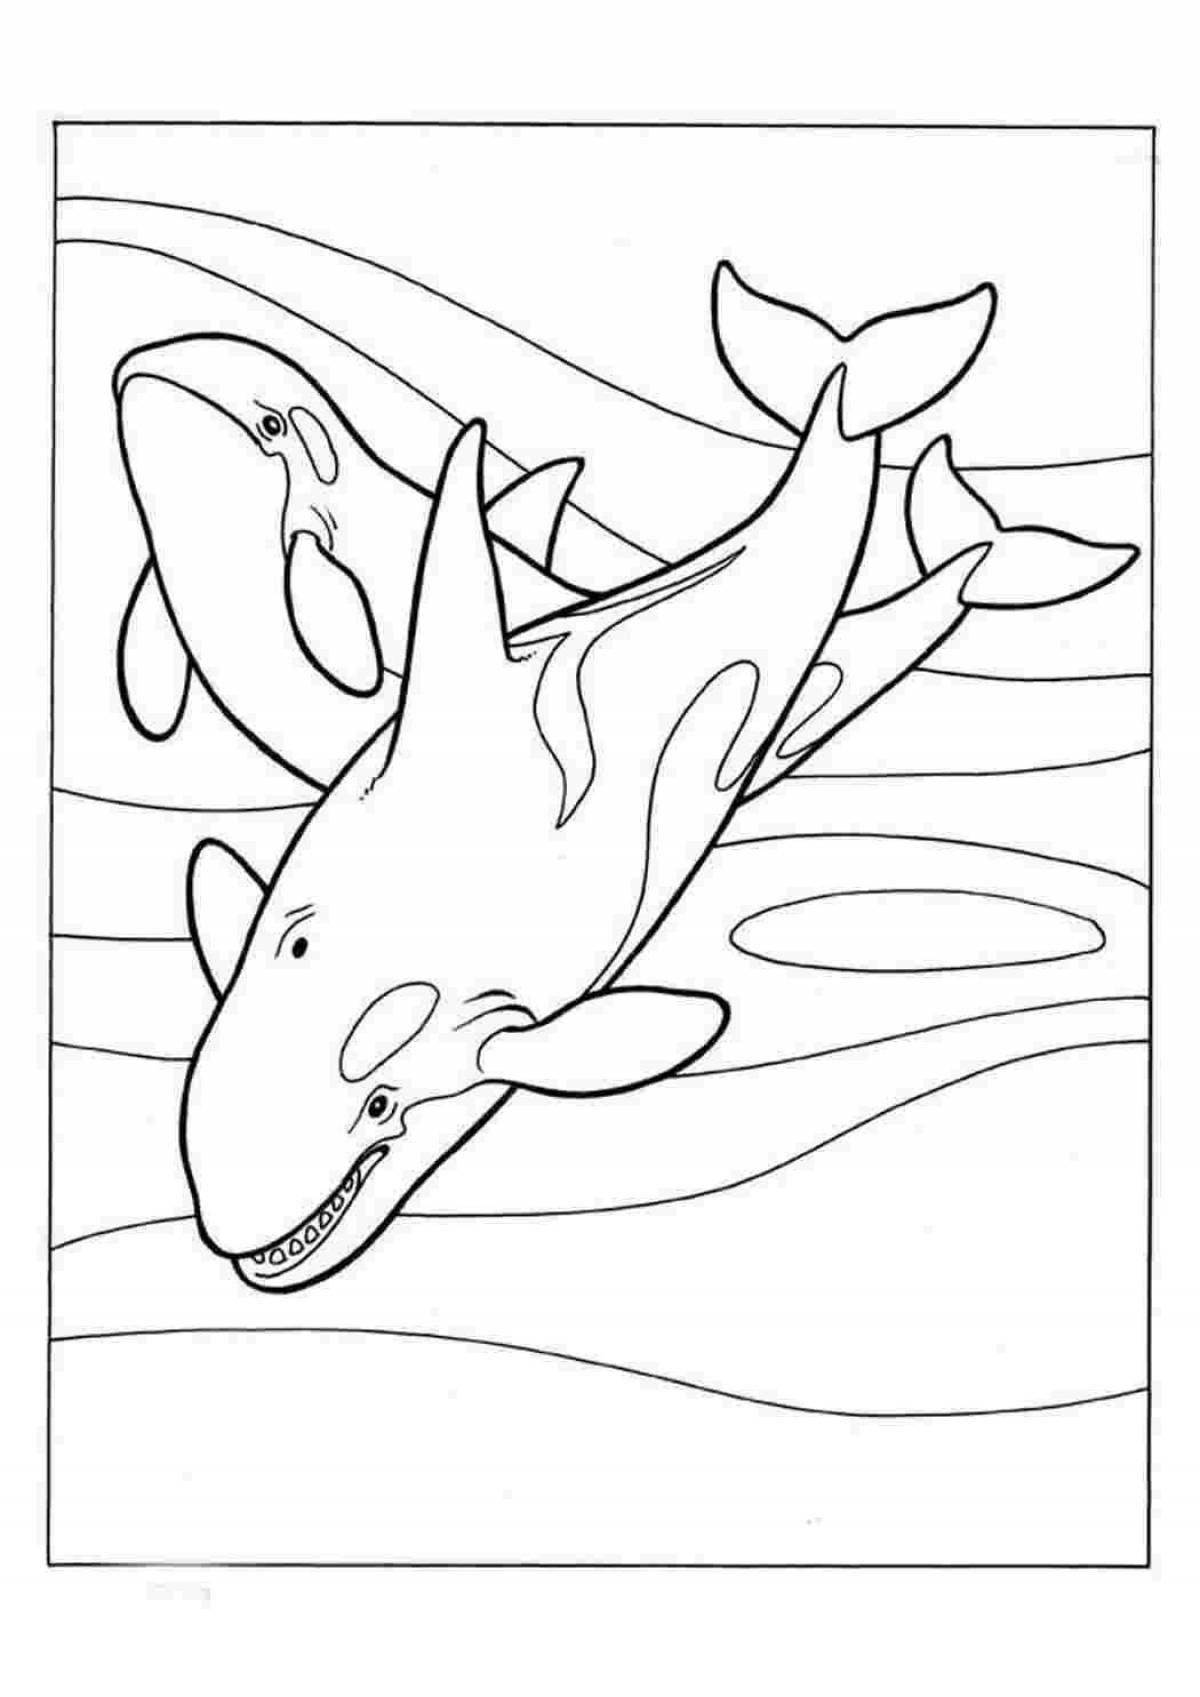 Adorable killer whale coloring pages for kids